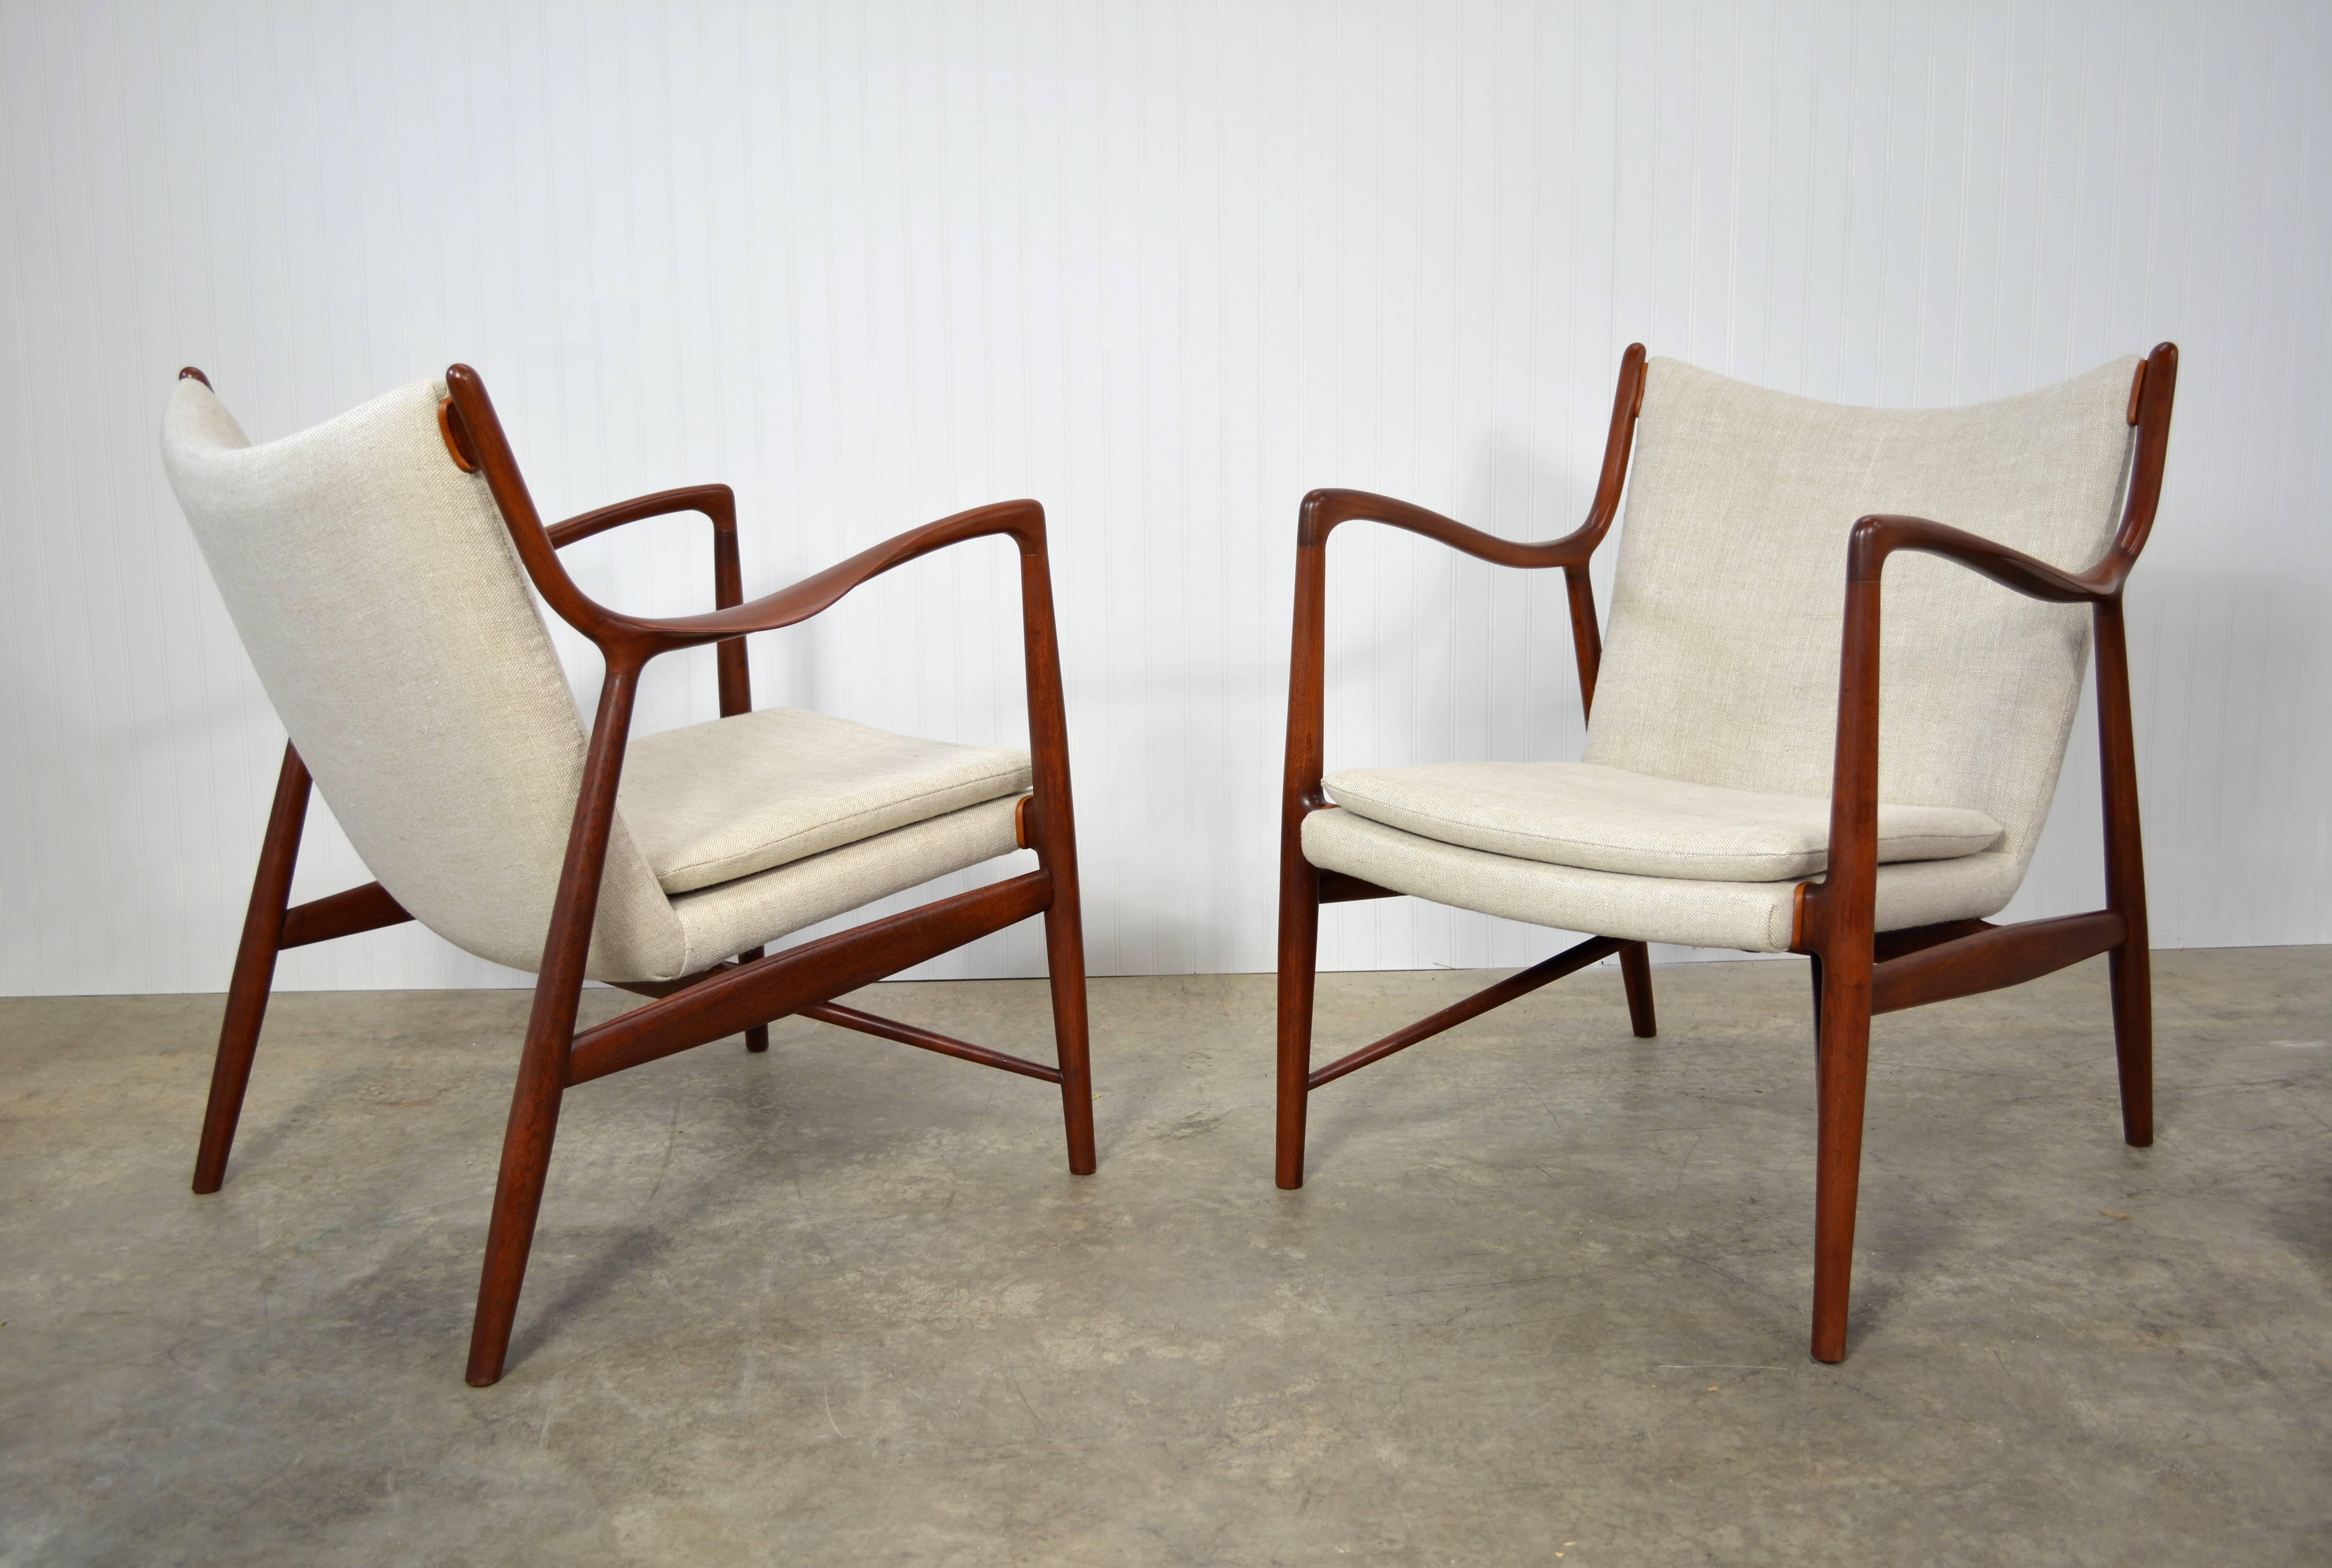 Pair of teak nv-45 lounge chairs designed by Finn Juhl for Neils Vodder. Newly restored and recovered in Belgian linen with cognac leather details.